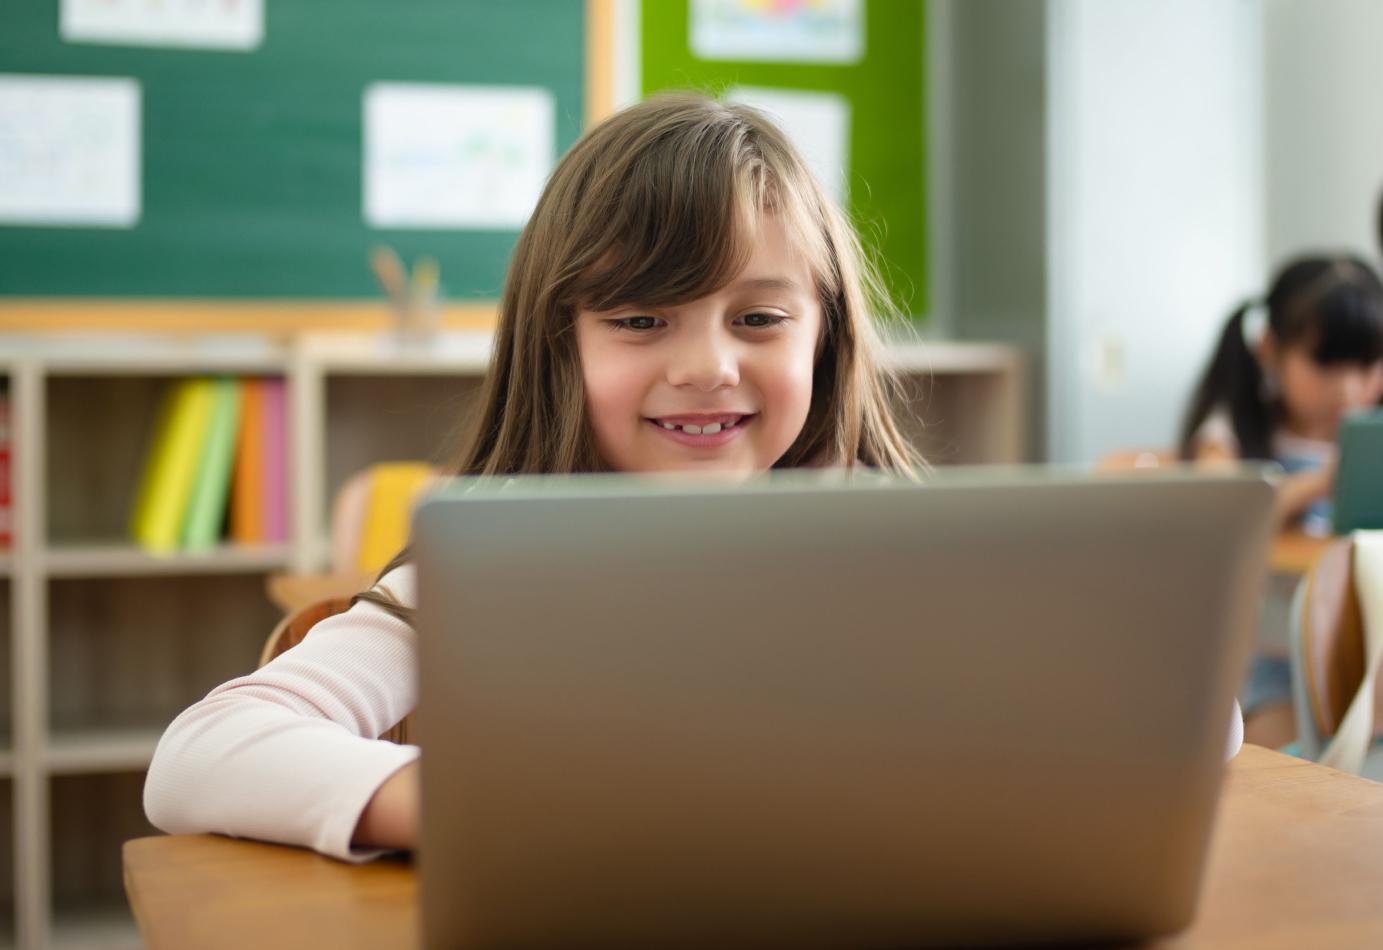 Young girl in a school classroom, smiling while looking at something on a laptop screen